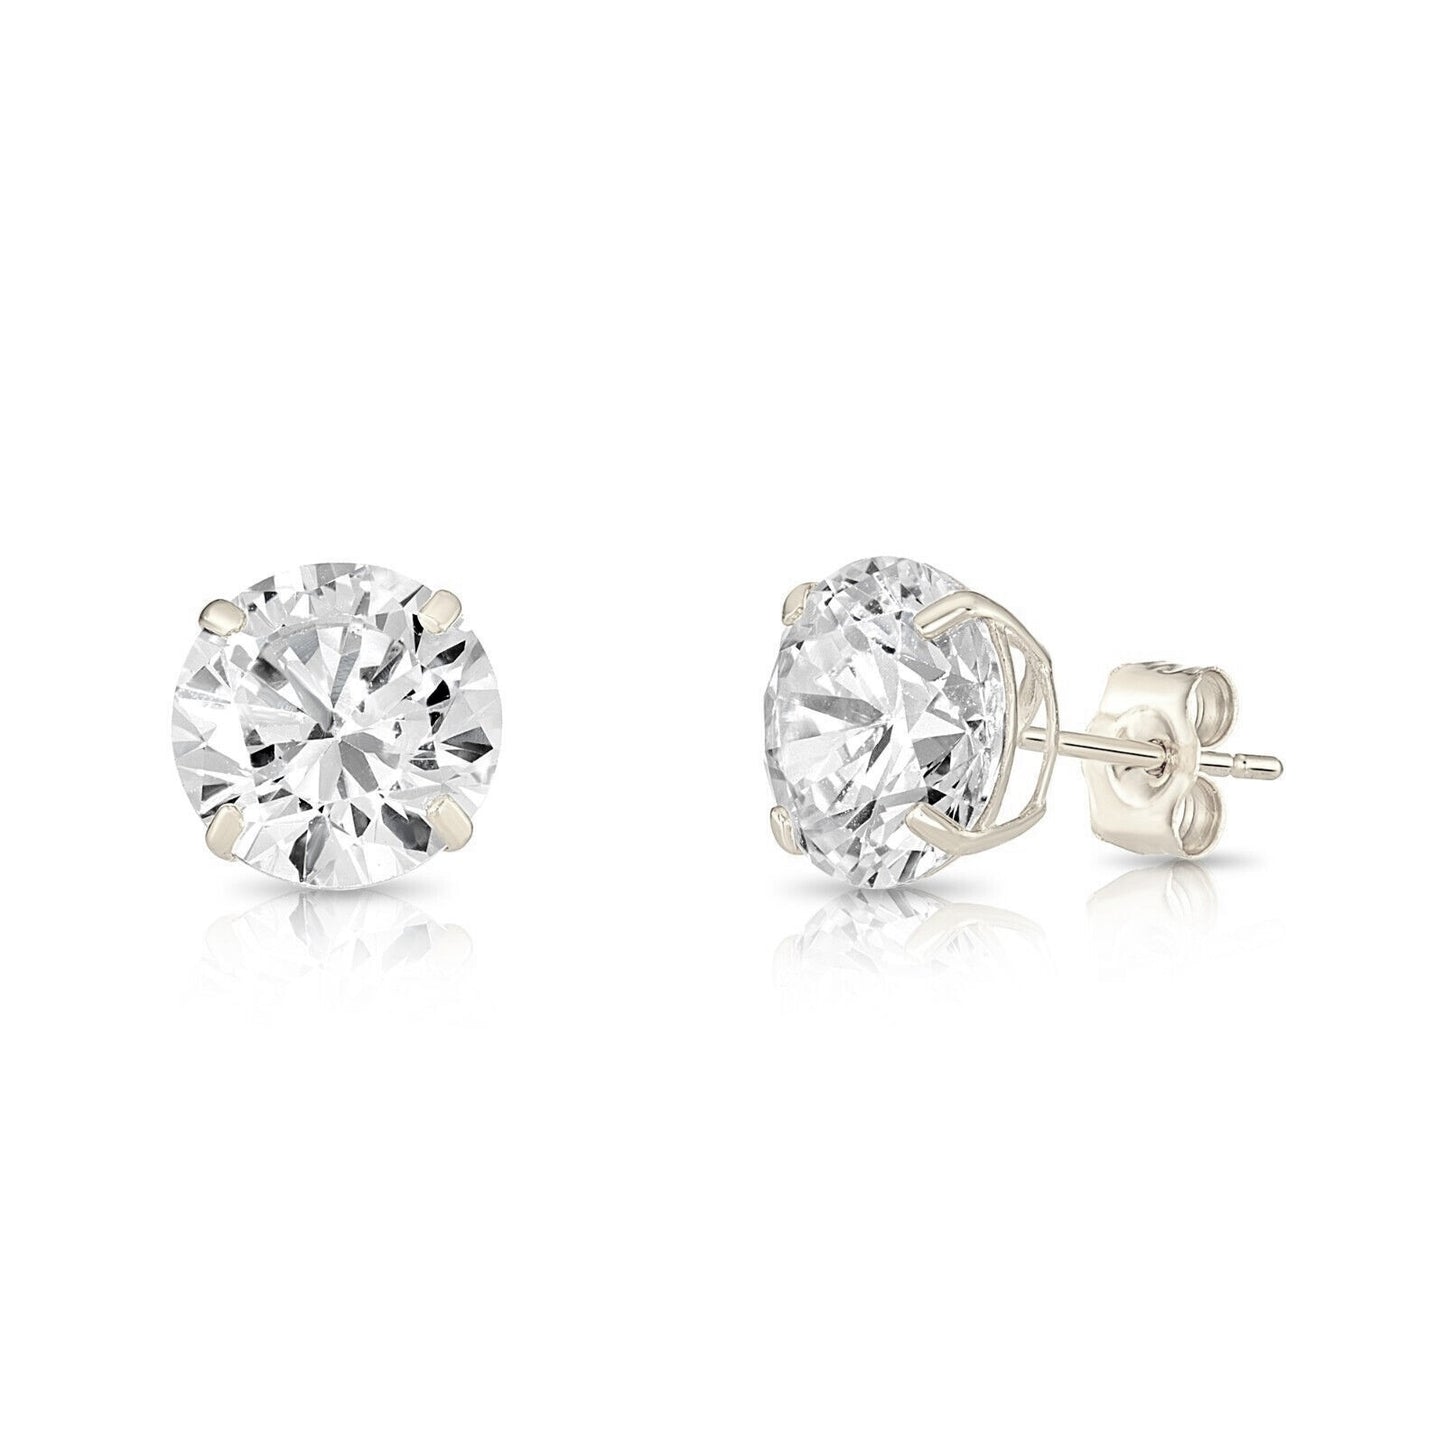 14K Solid Yellow or White Gold Round CZ Stud Earrings Basket Setting 2-10mm